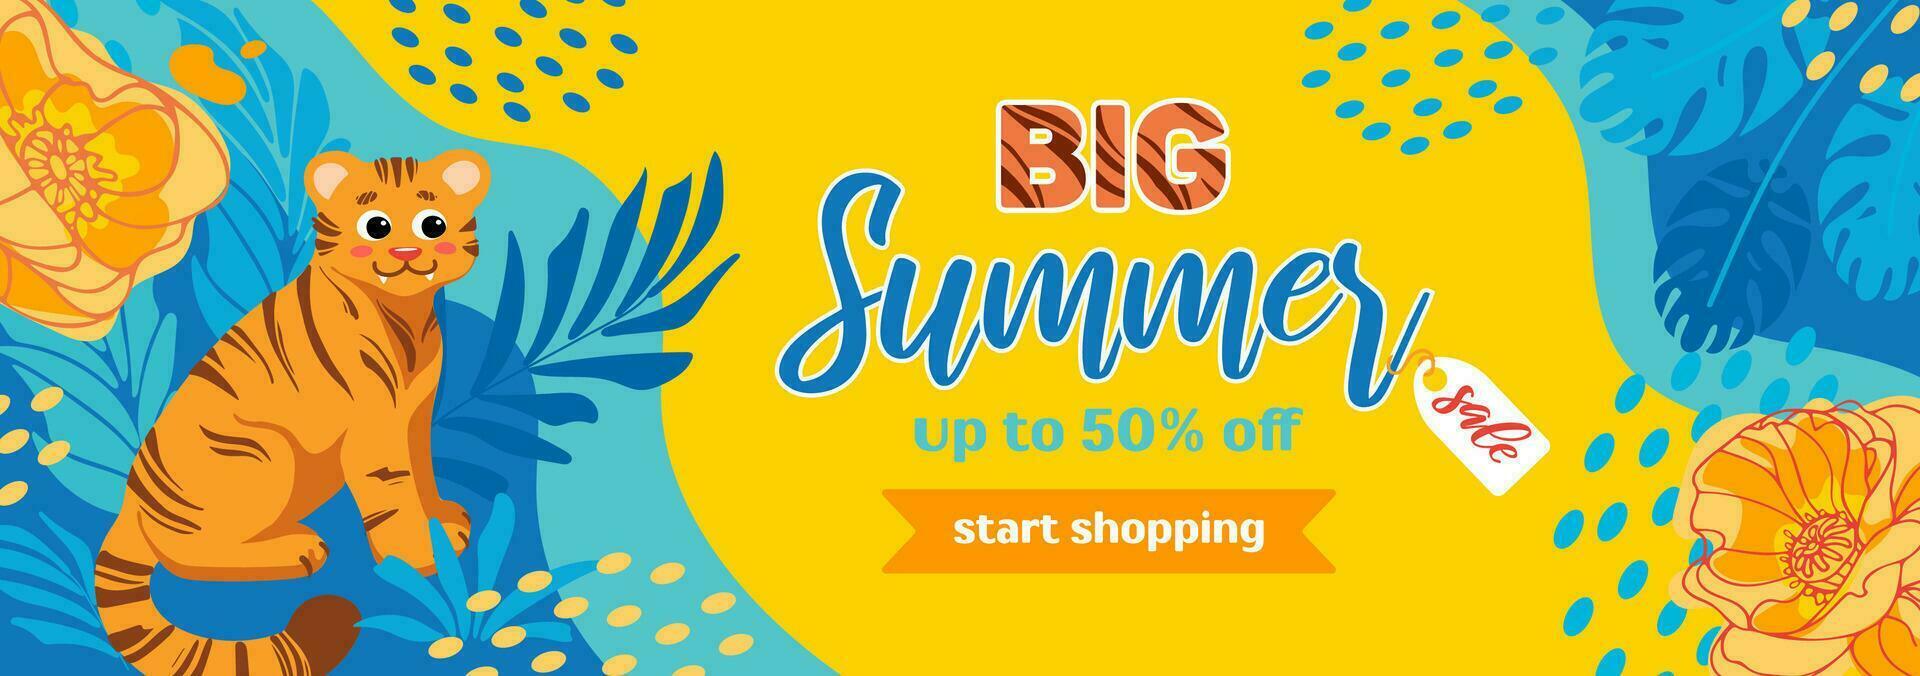 Bright summer sale horizontal banner. Tiger, tropical leaves and flowers. In bright yellow blue neon colors. Hippie, psychedelic. For advertising, website, flyer. vector